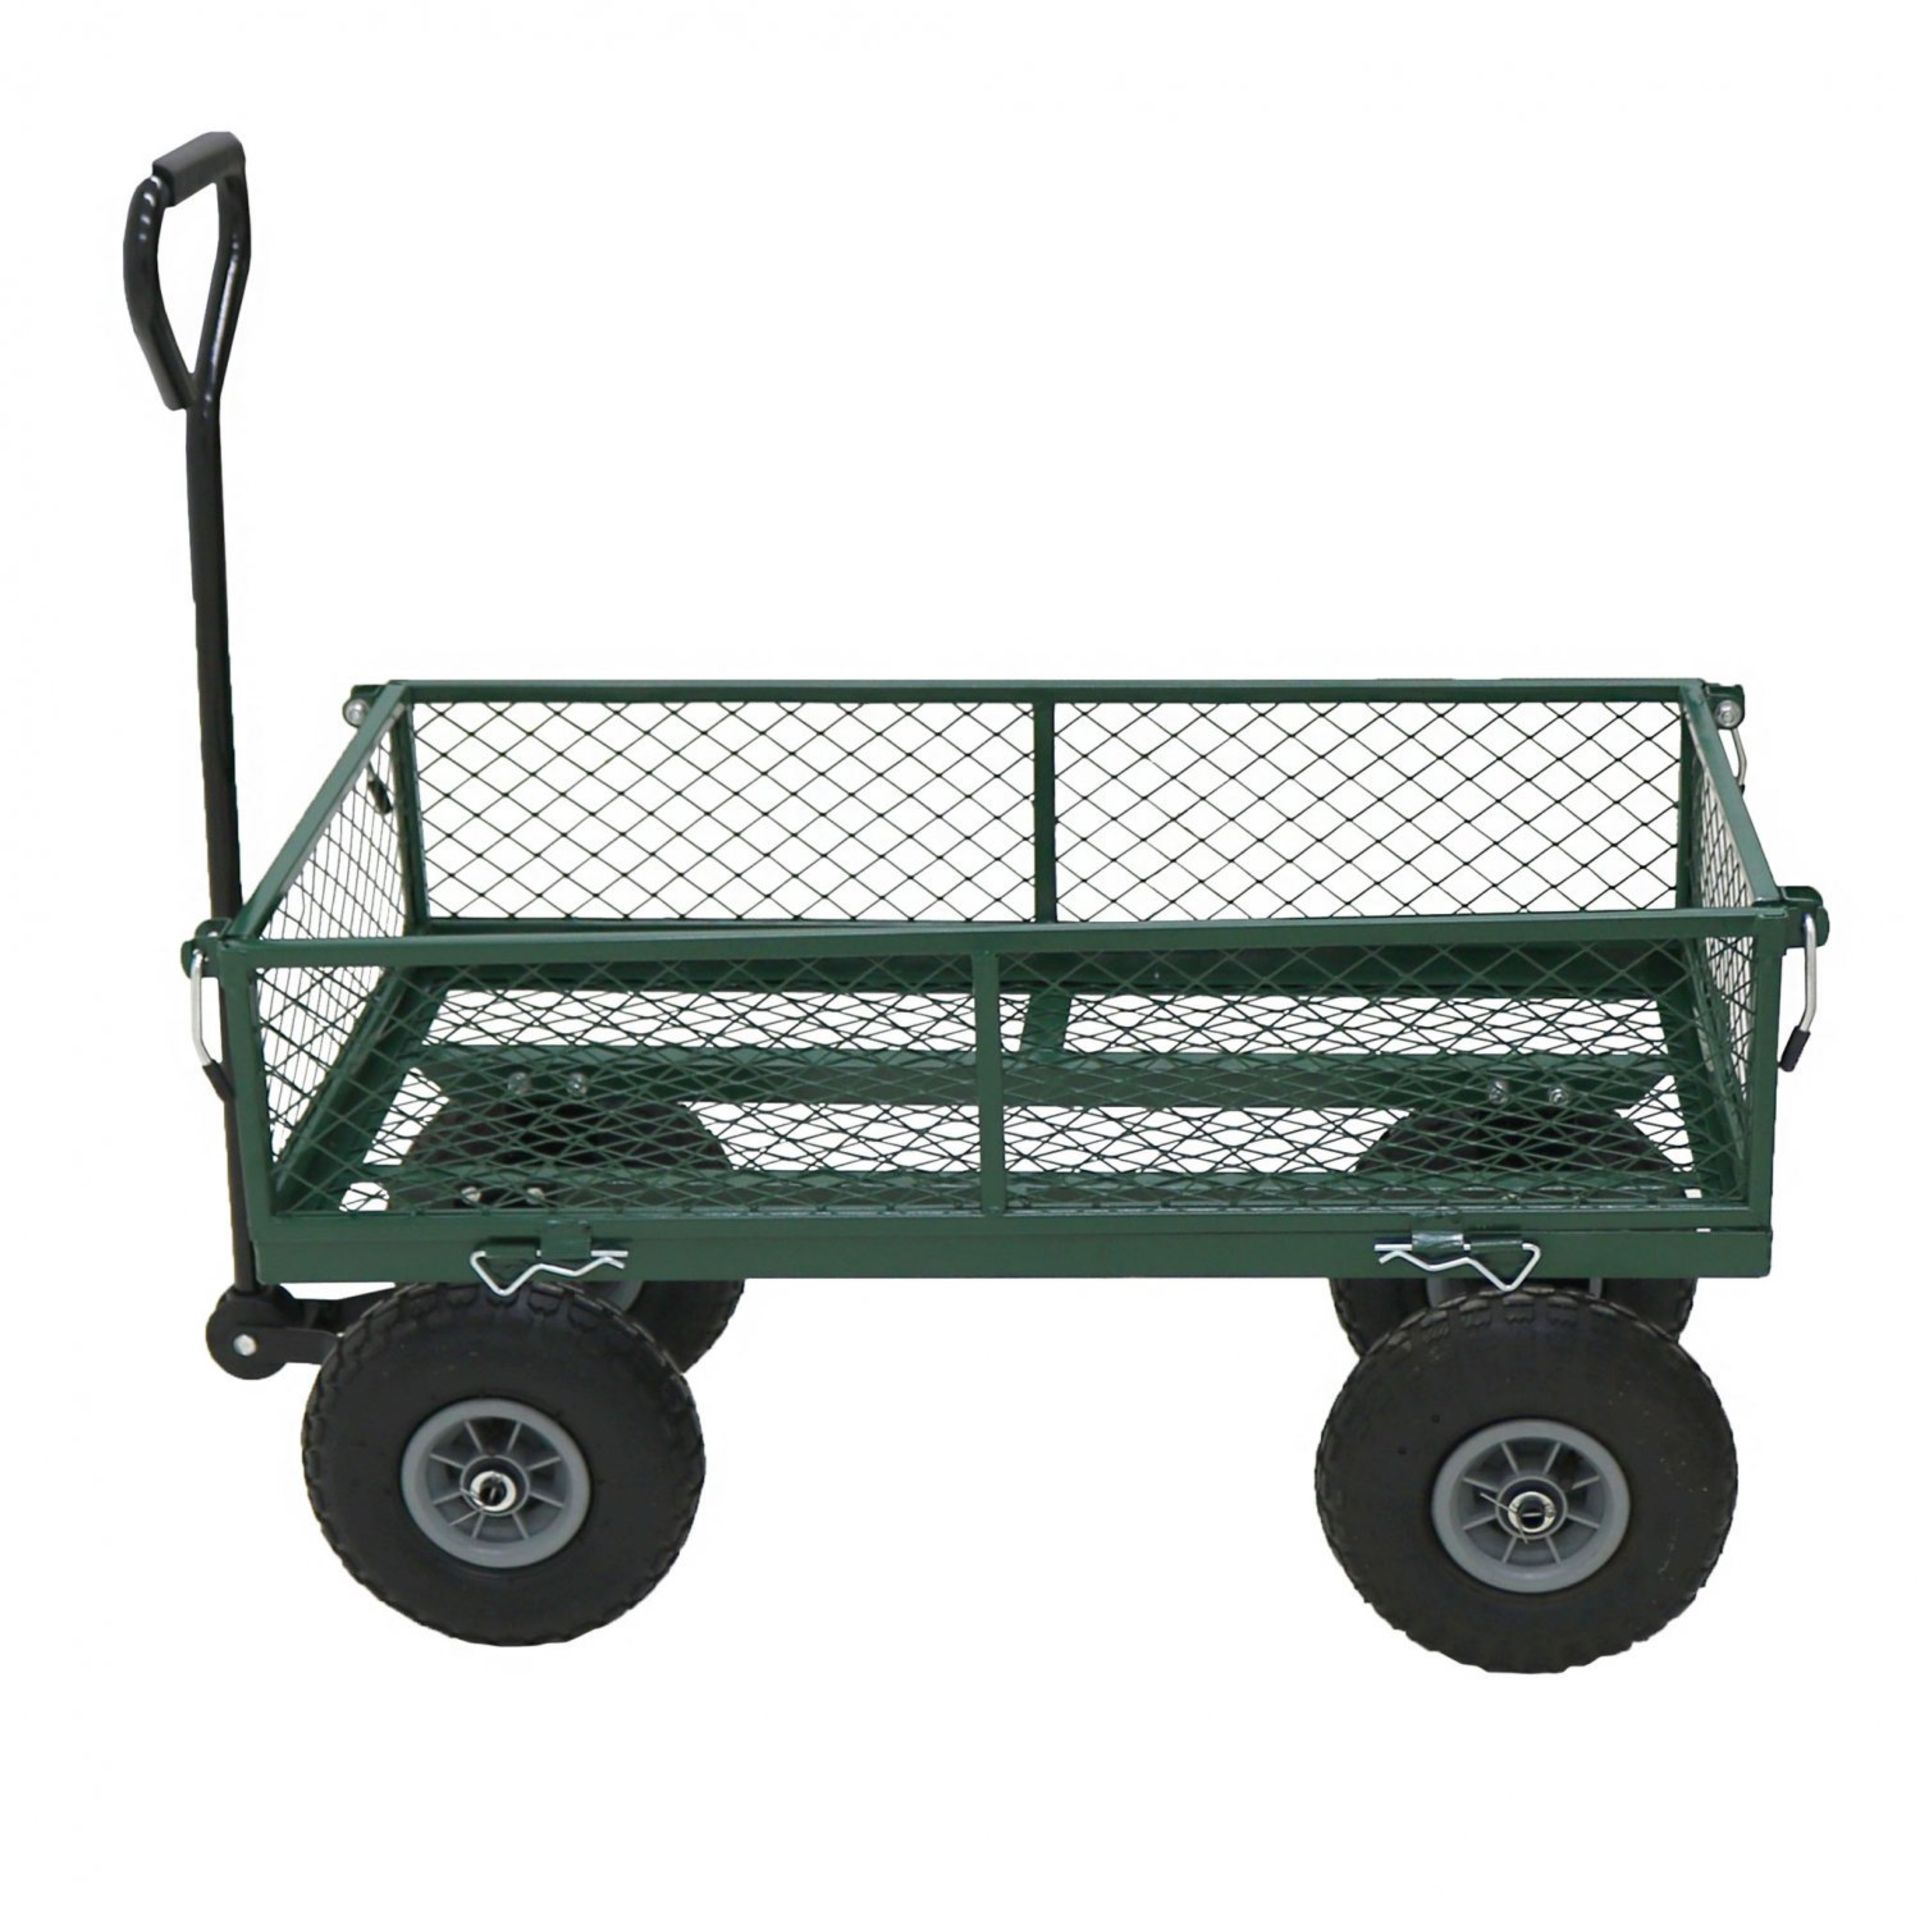 (LF75) Heavy Duty Metal Gardening Trolley - Green Trailer Cart Our latest arrival is the gar... - Image 2 of 2